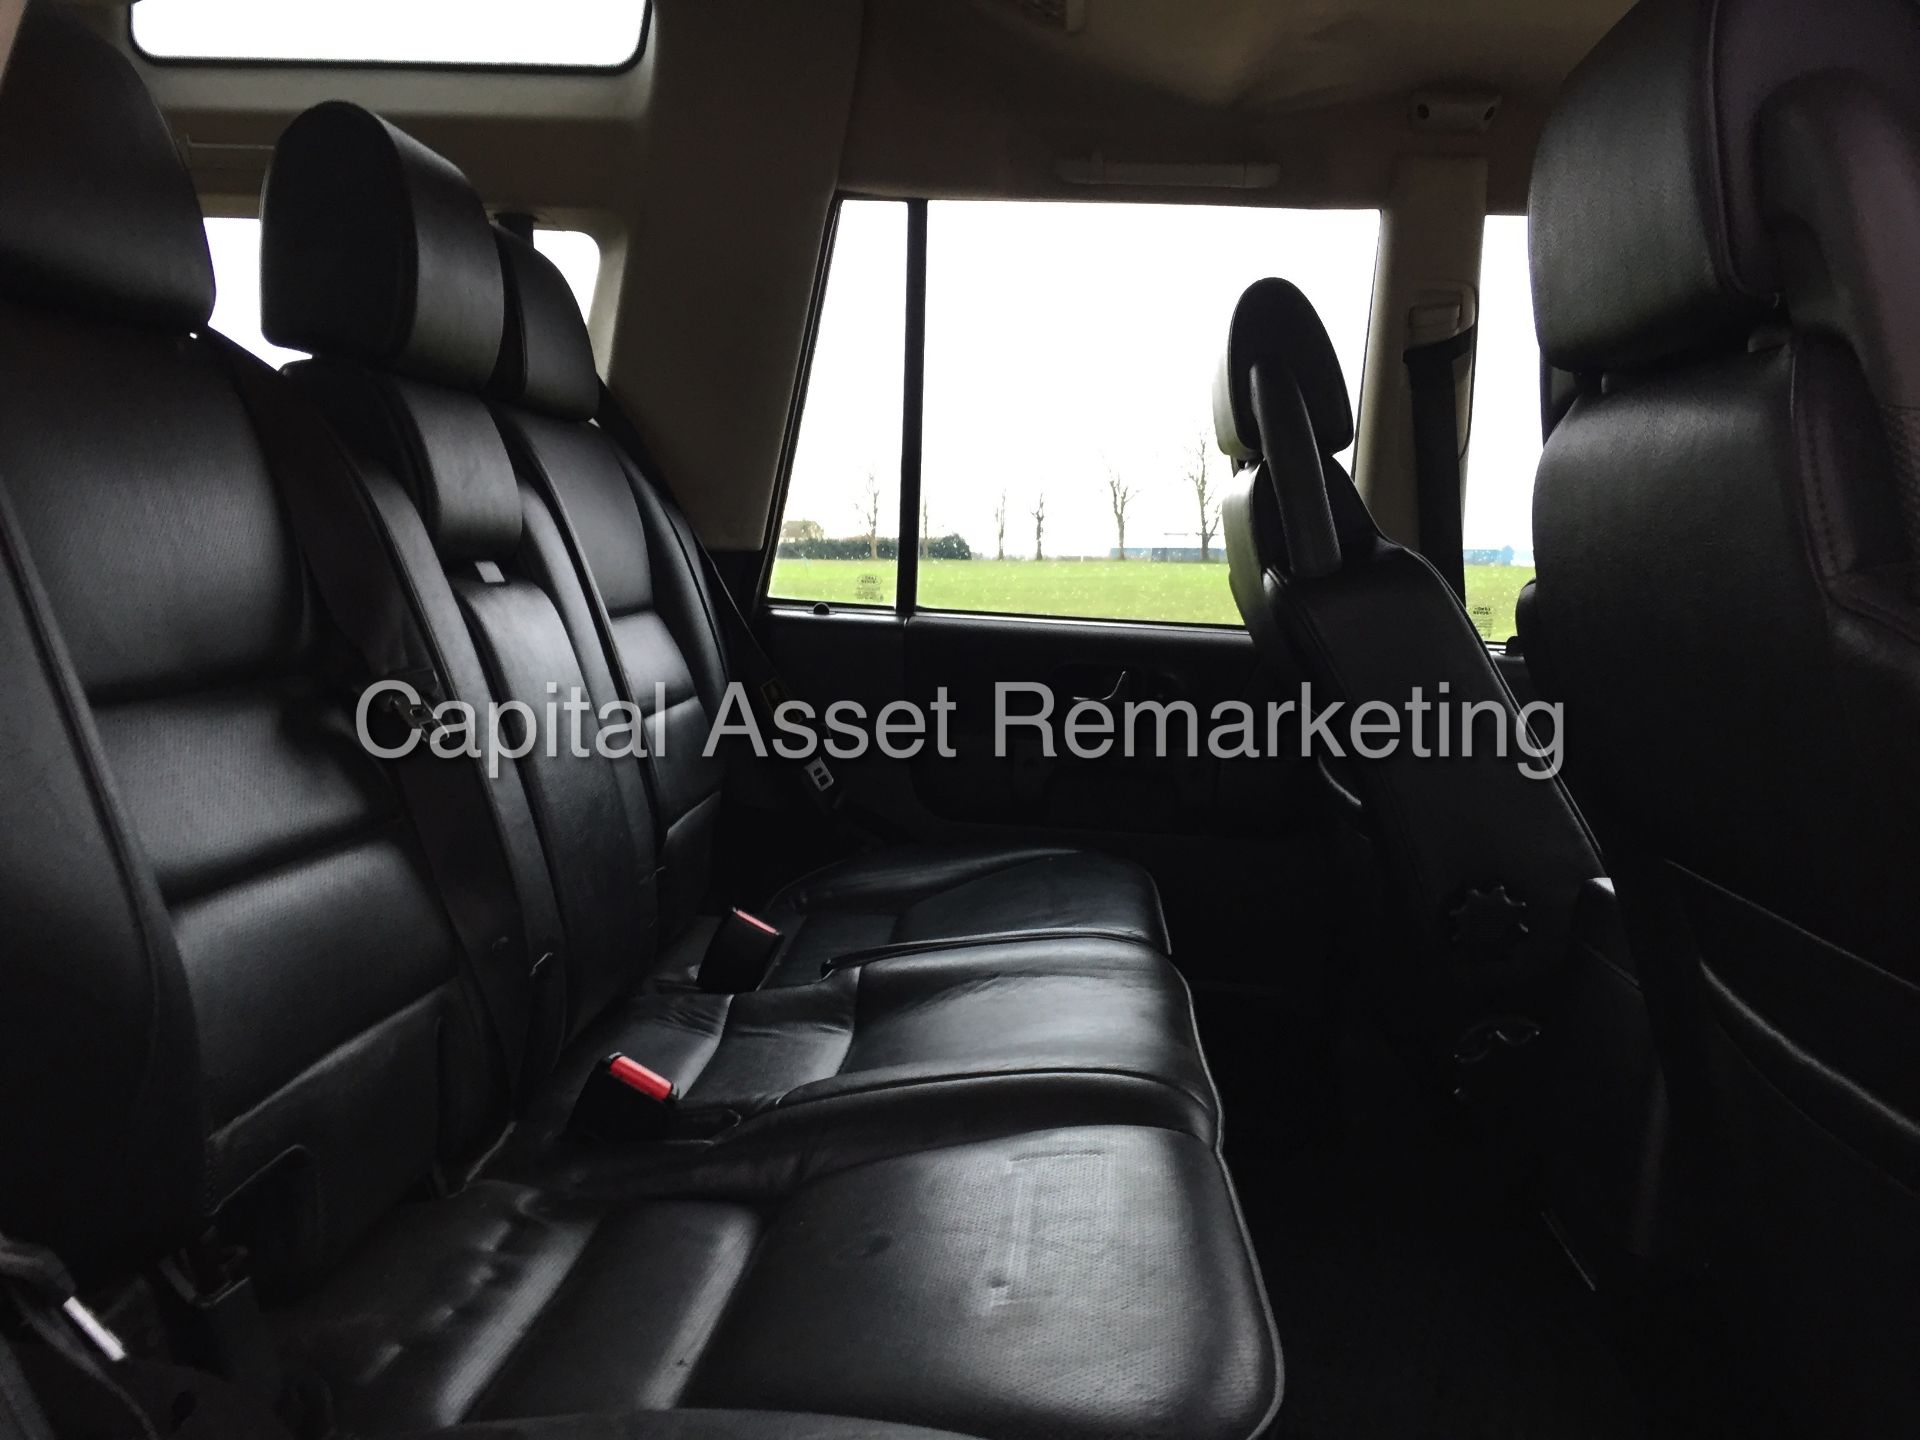 LAND ROVER DISCOVERY TD5 'LANDMARK' (2004 - 04 REG) 7 SEATER - LEATHER - AUTO (NO VAT - SAVE 20%) - Image 13 of 20